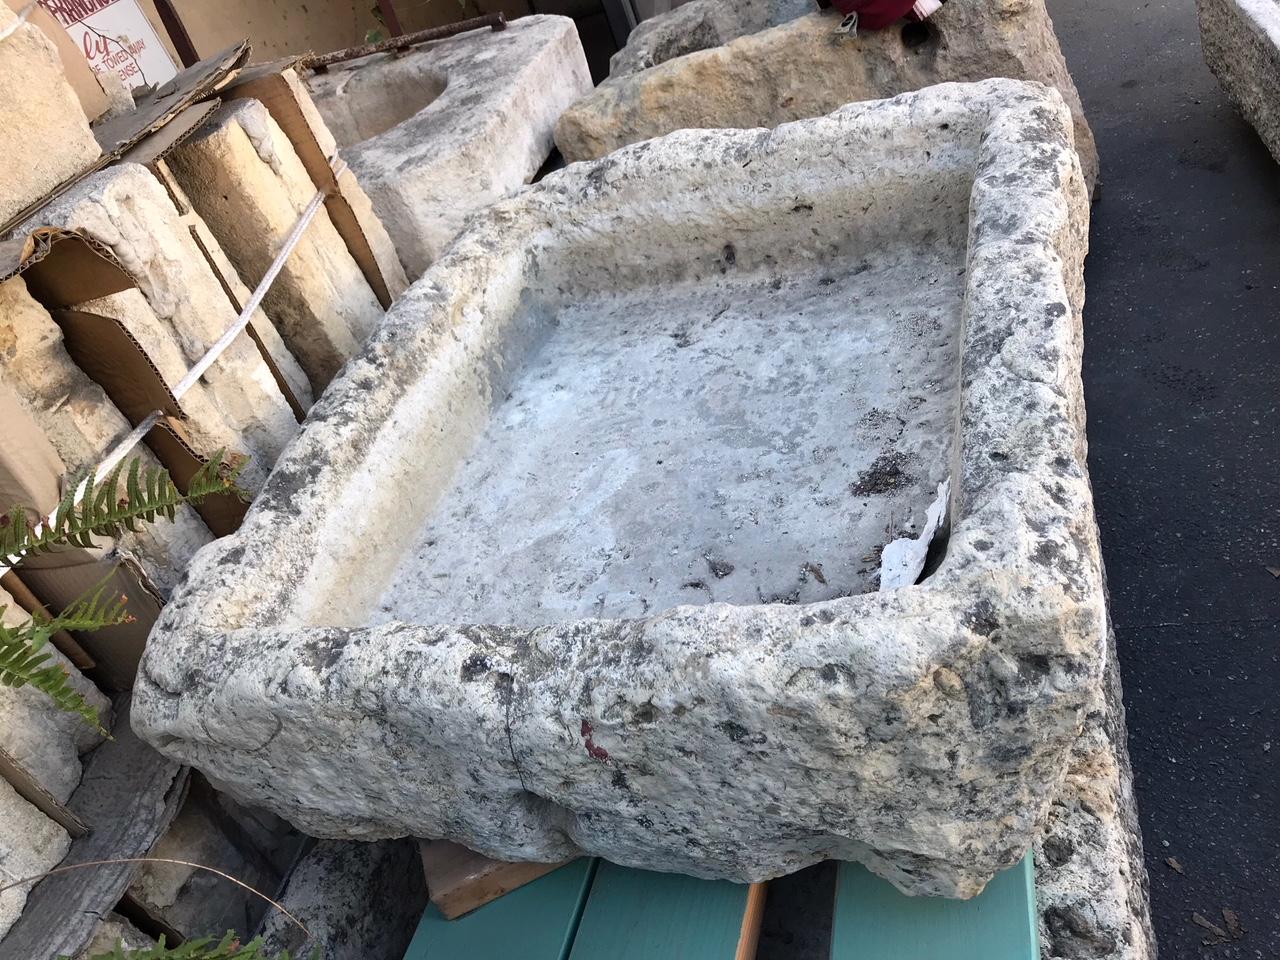 Hand carved stone farm sink container basin planter fountain trough antique LA. A very charming and rustic 18th century water fountain Basin sink of hand carved stone. They used them as outdoor washing tubs, to wash the fruits and vegetables in the